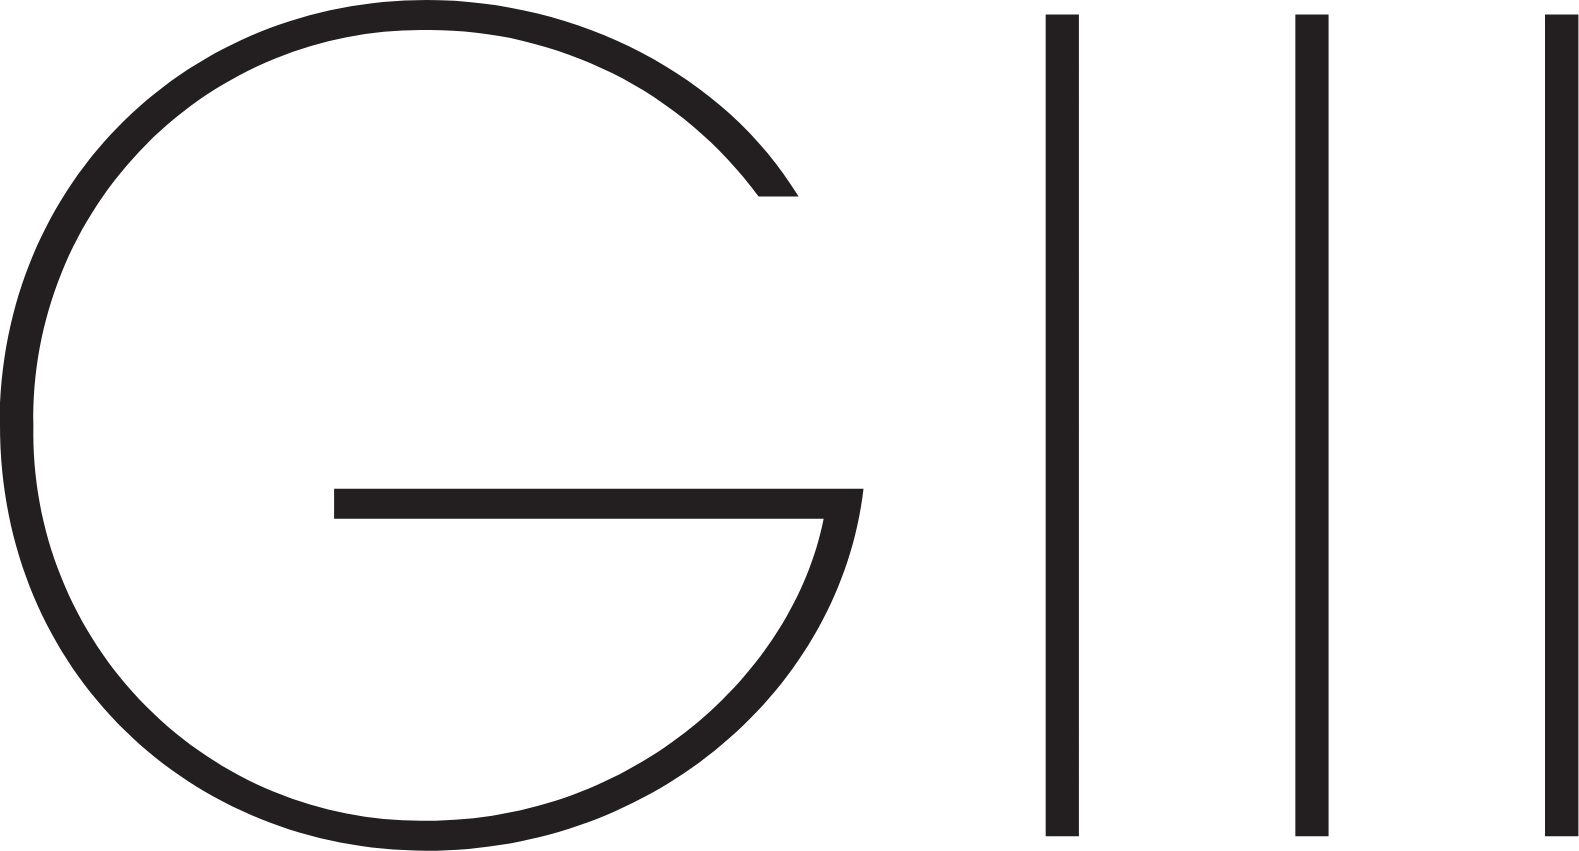 G-III Apparel Group logo in transparent PNG and vectorized SVG formats